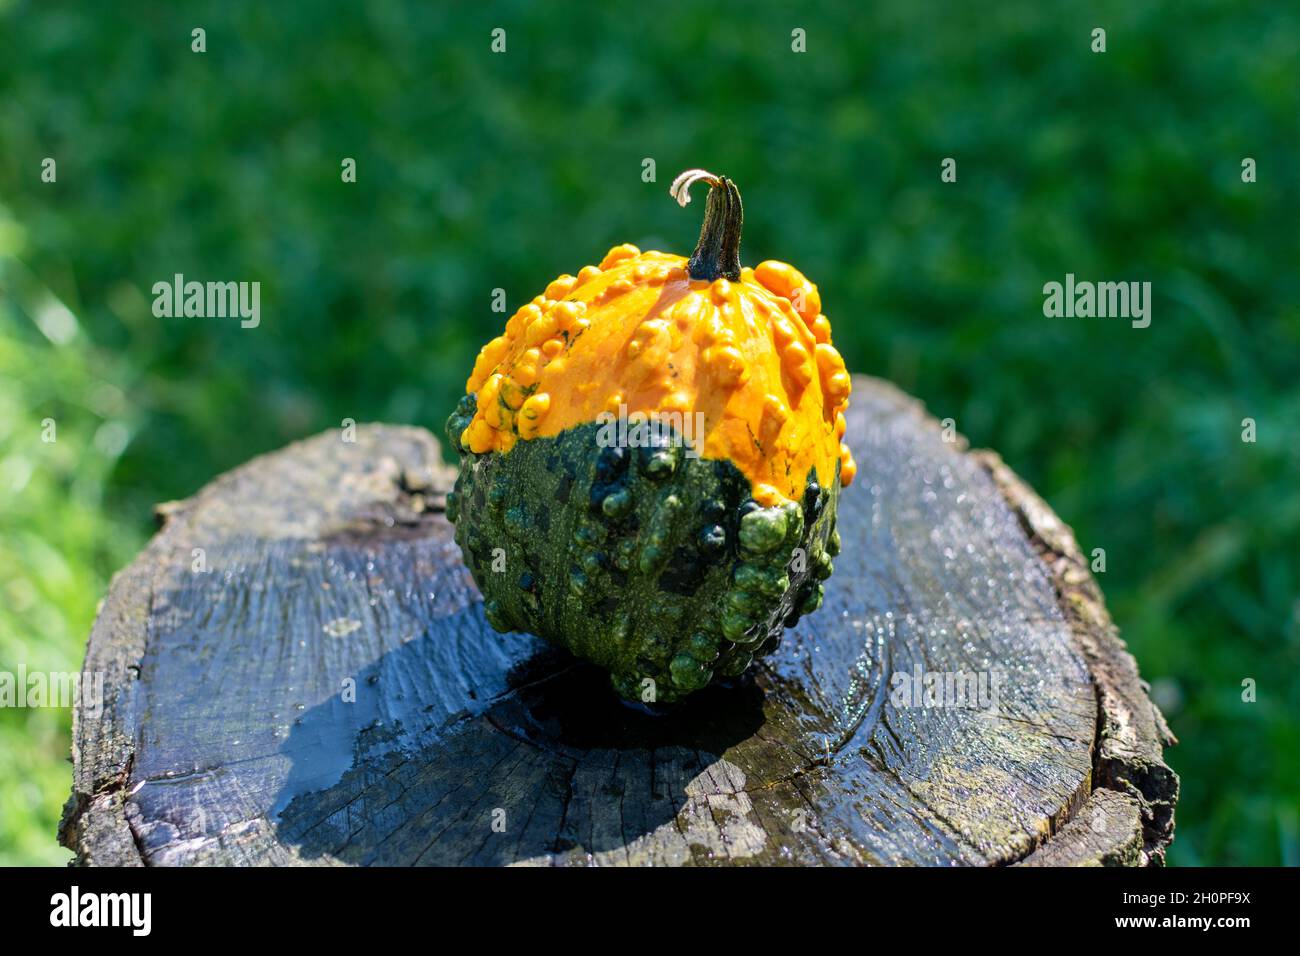 Warty Goblin - Hybrid Pumpkin on a wooden table in nature Stock Photo